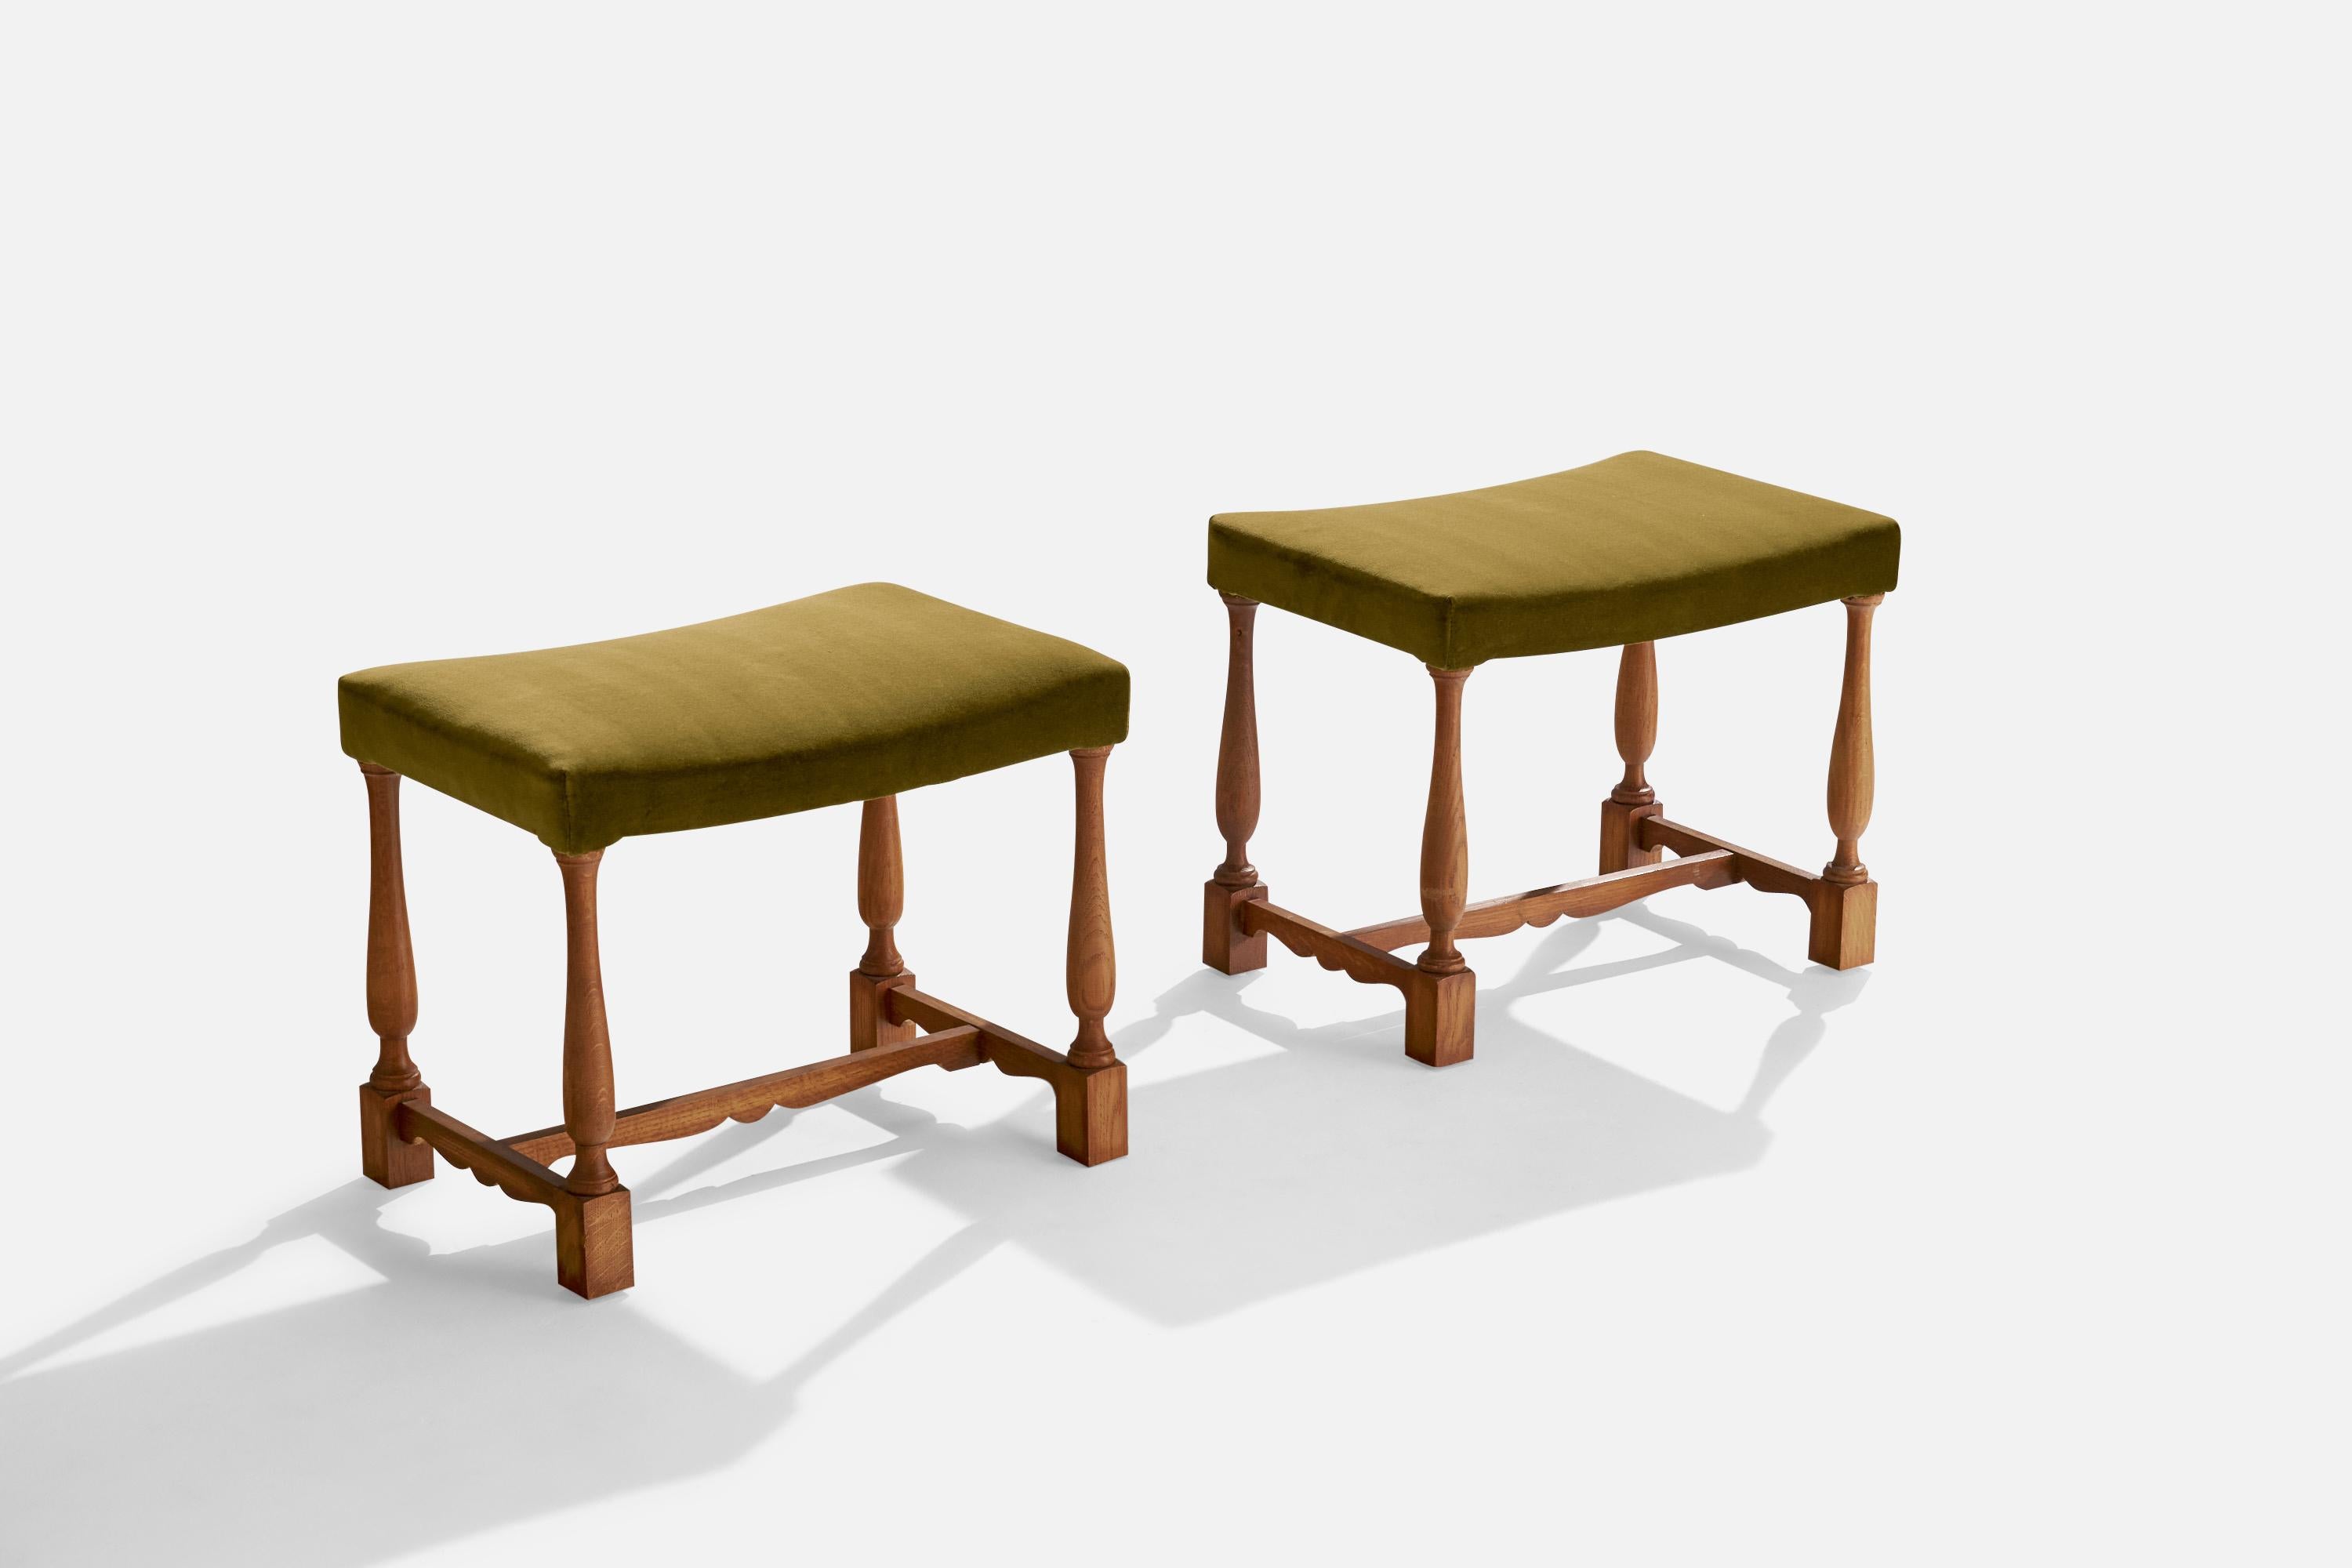 A pair of oak and green velvet stools designed and produced in Sweden, c. 1930s.

Reupholstered in brand new velvet.

Seat height: 17”